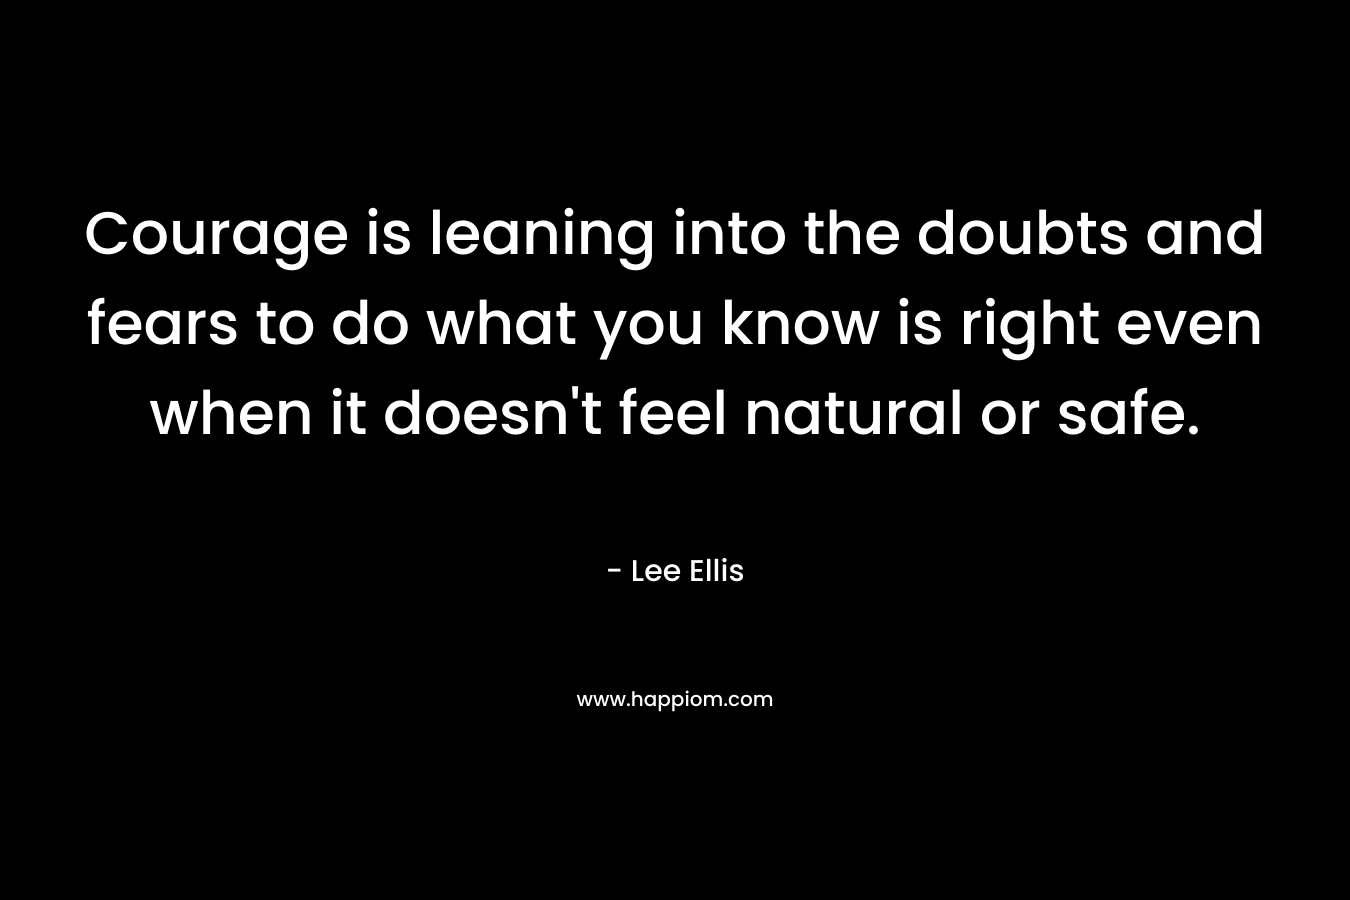 Courage is leaning into the doubts and fears to do what you know is right even when it doesn’t feel natural or safe. – Lee Ellis